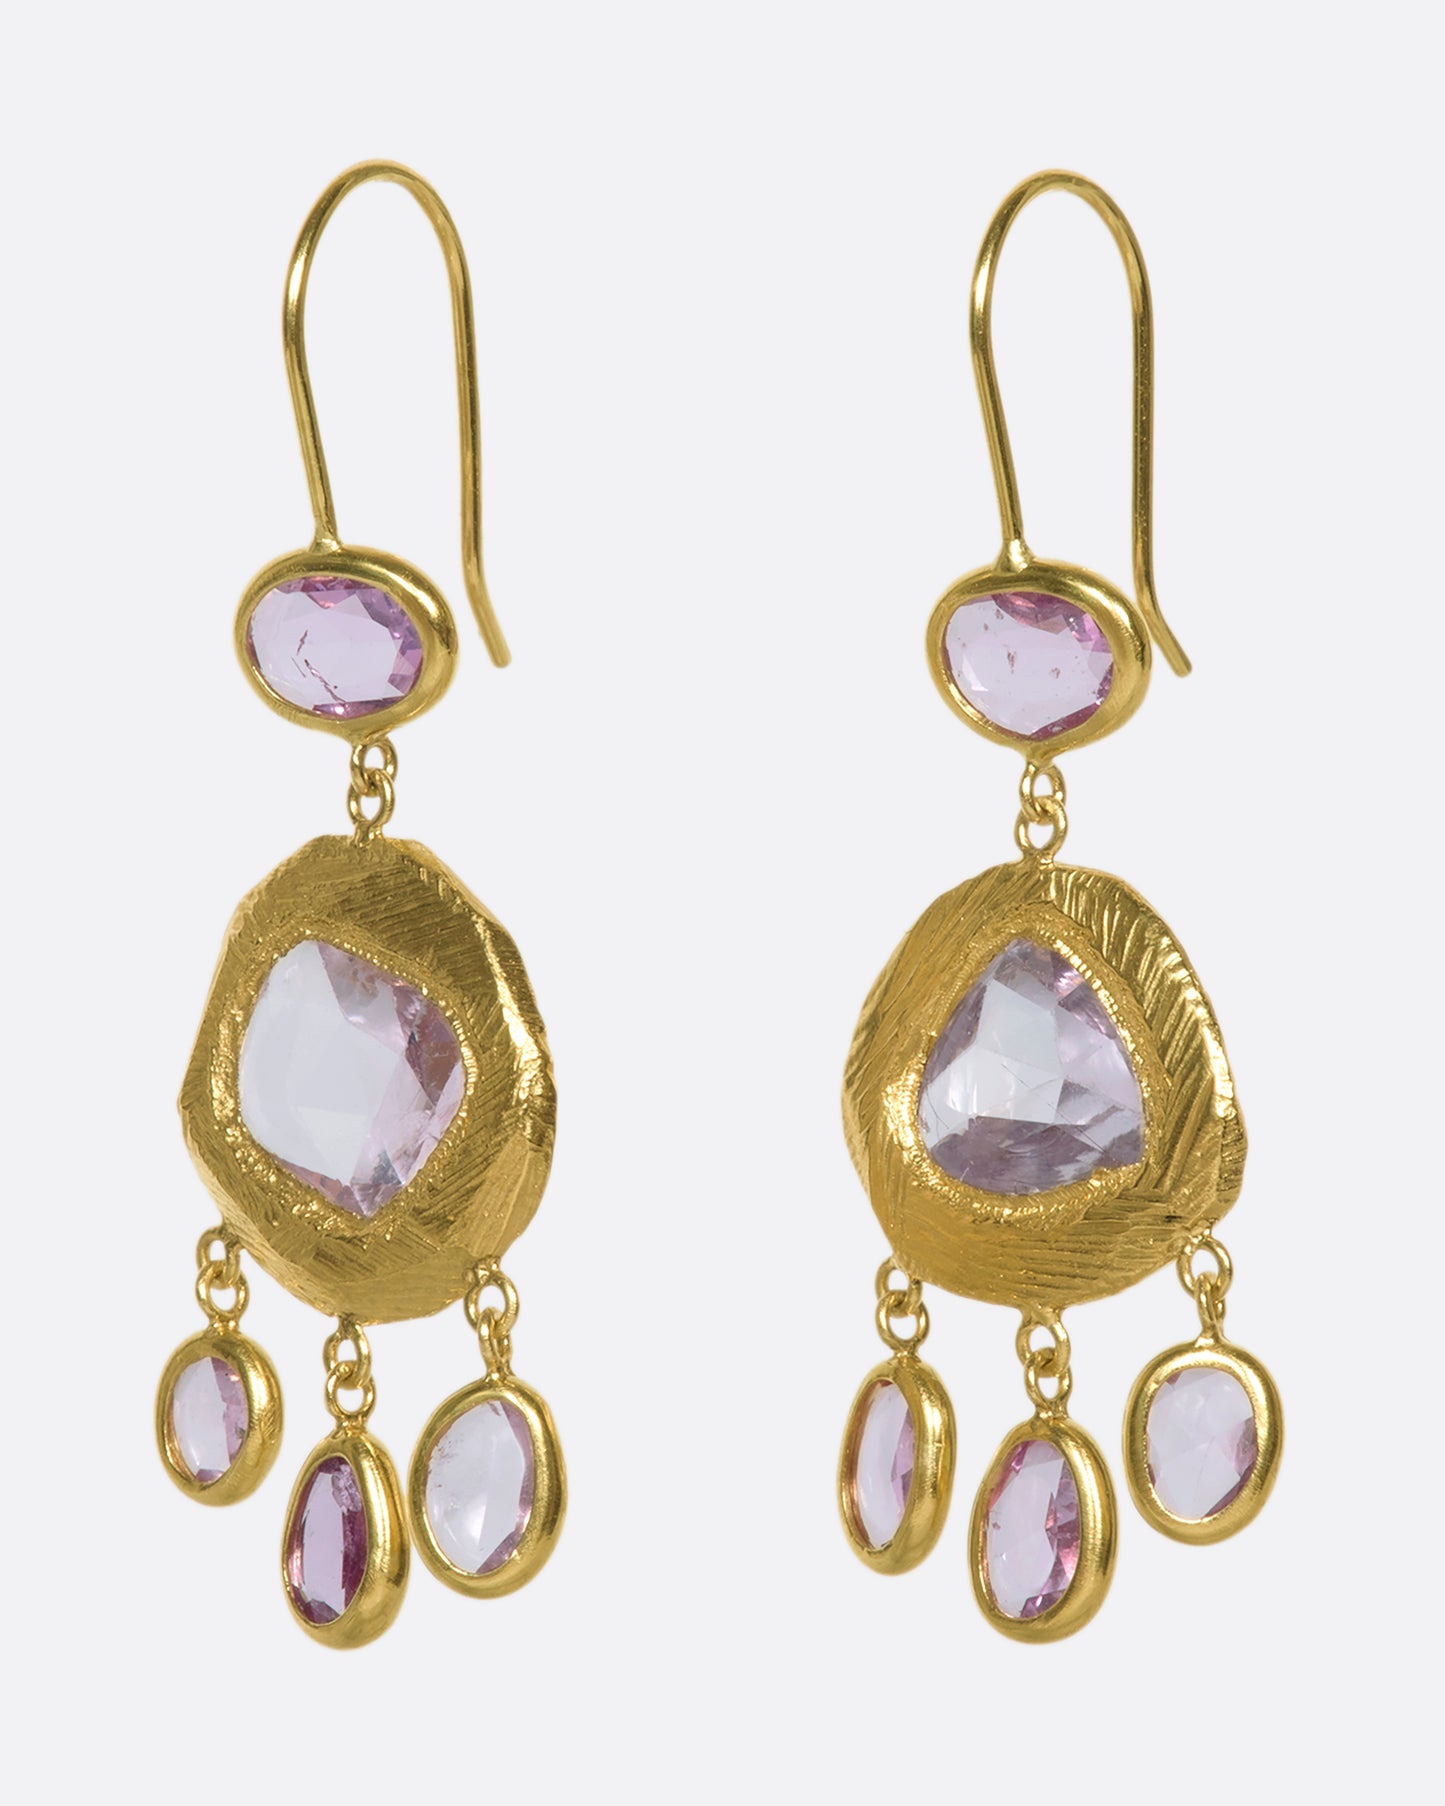 One-of-a-kind three-tiered dangle earrings with pink sapphires set in 18k gold.